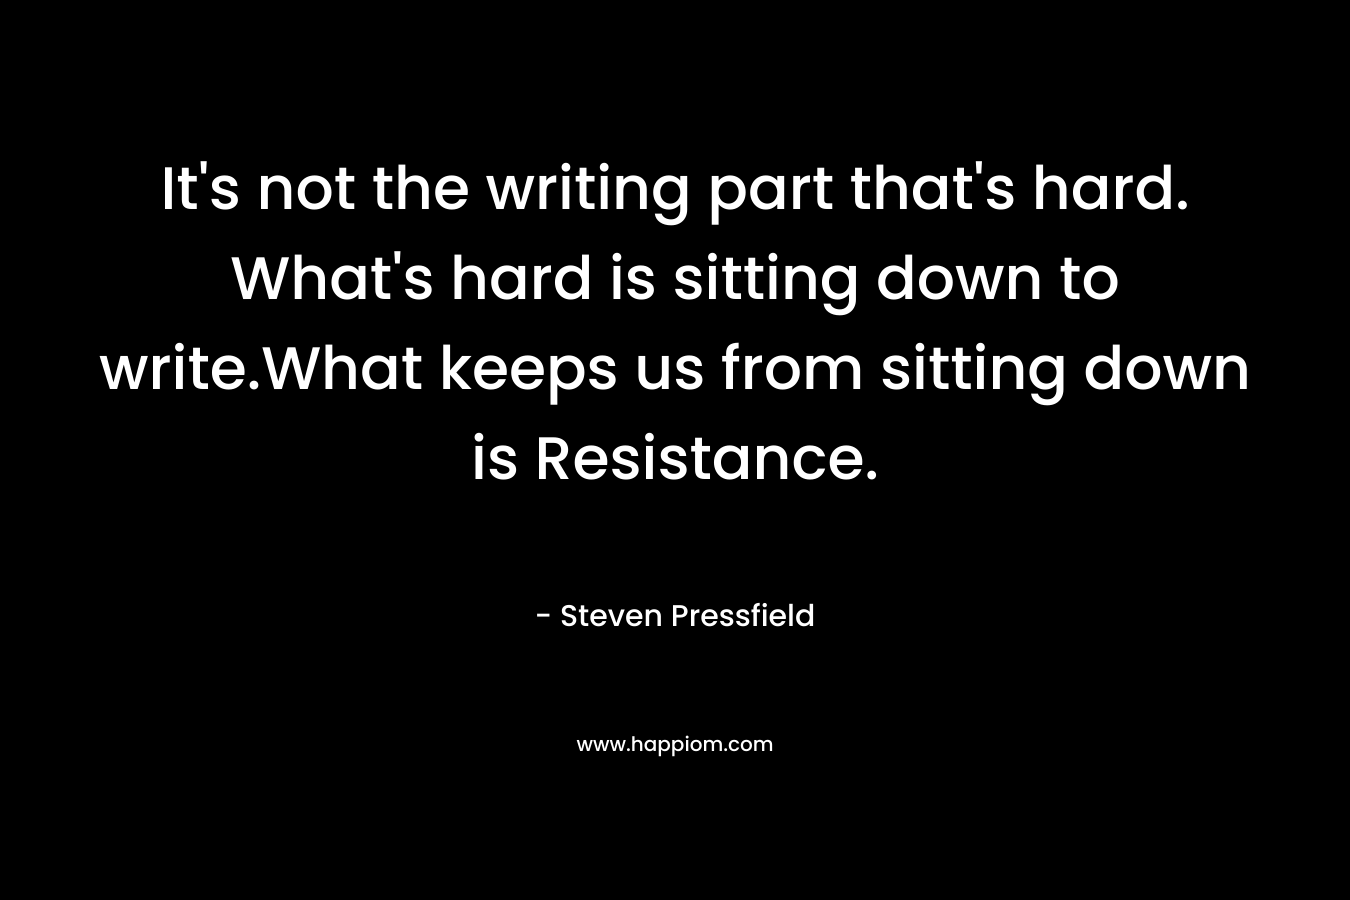 It's not the writing part that's hard. What's hard is sitting down to write.What keeps us from sitting down is Resistance.